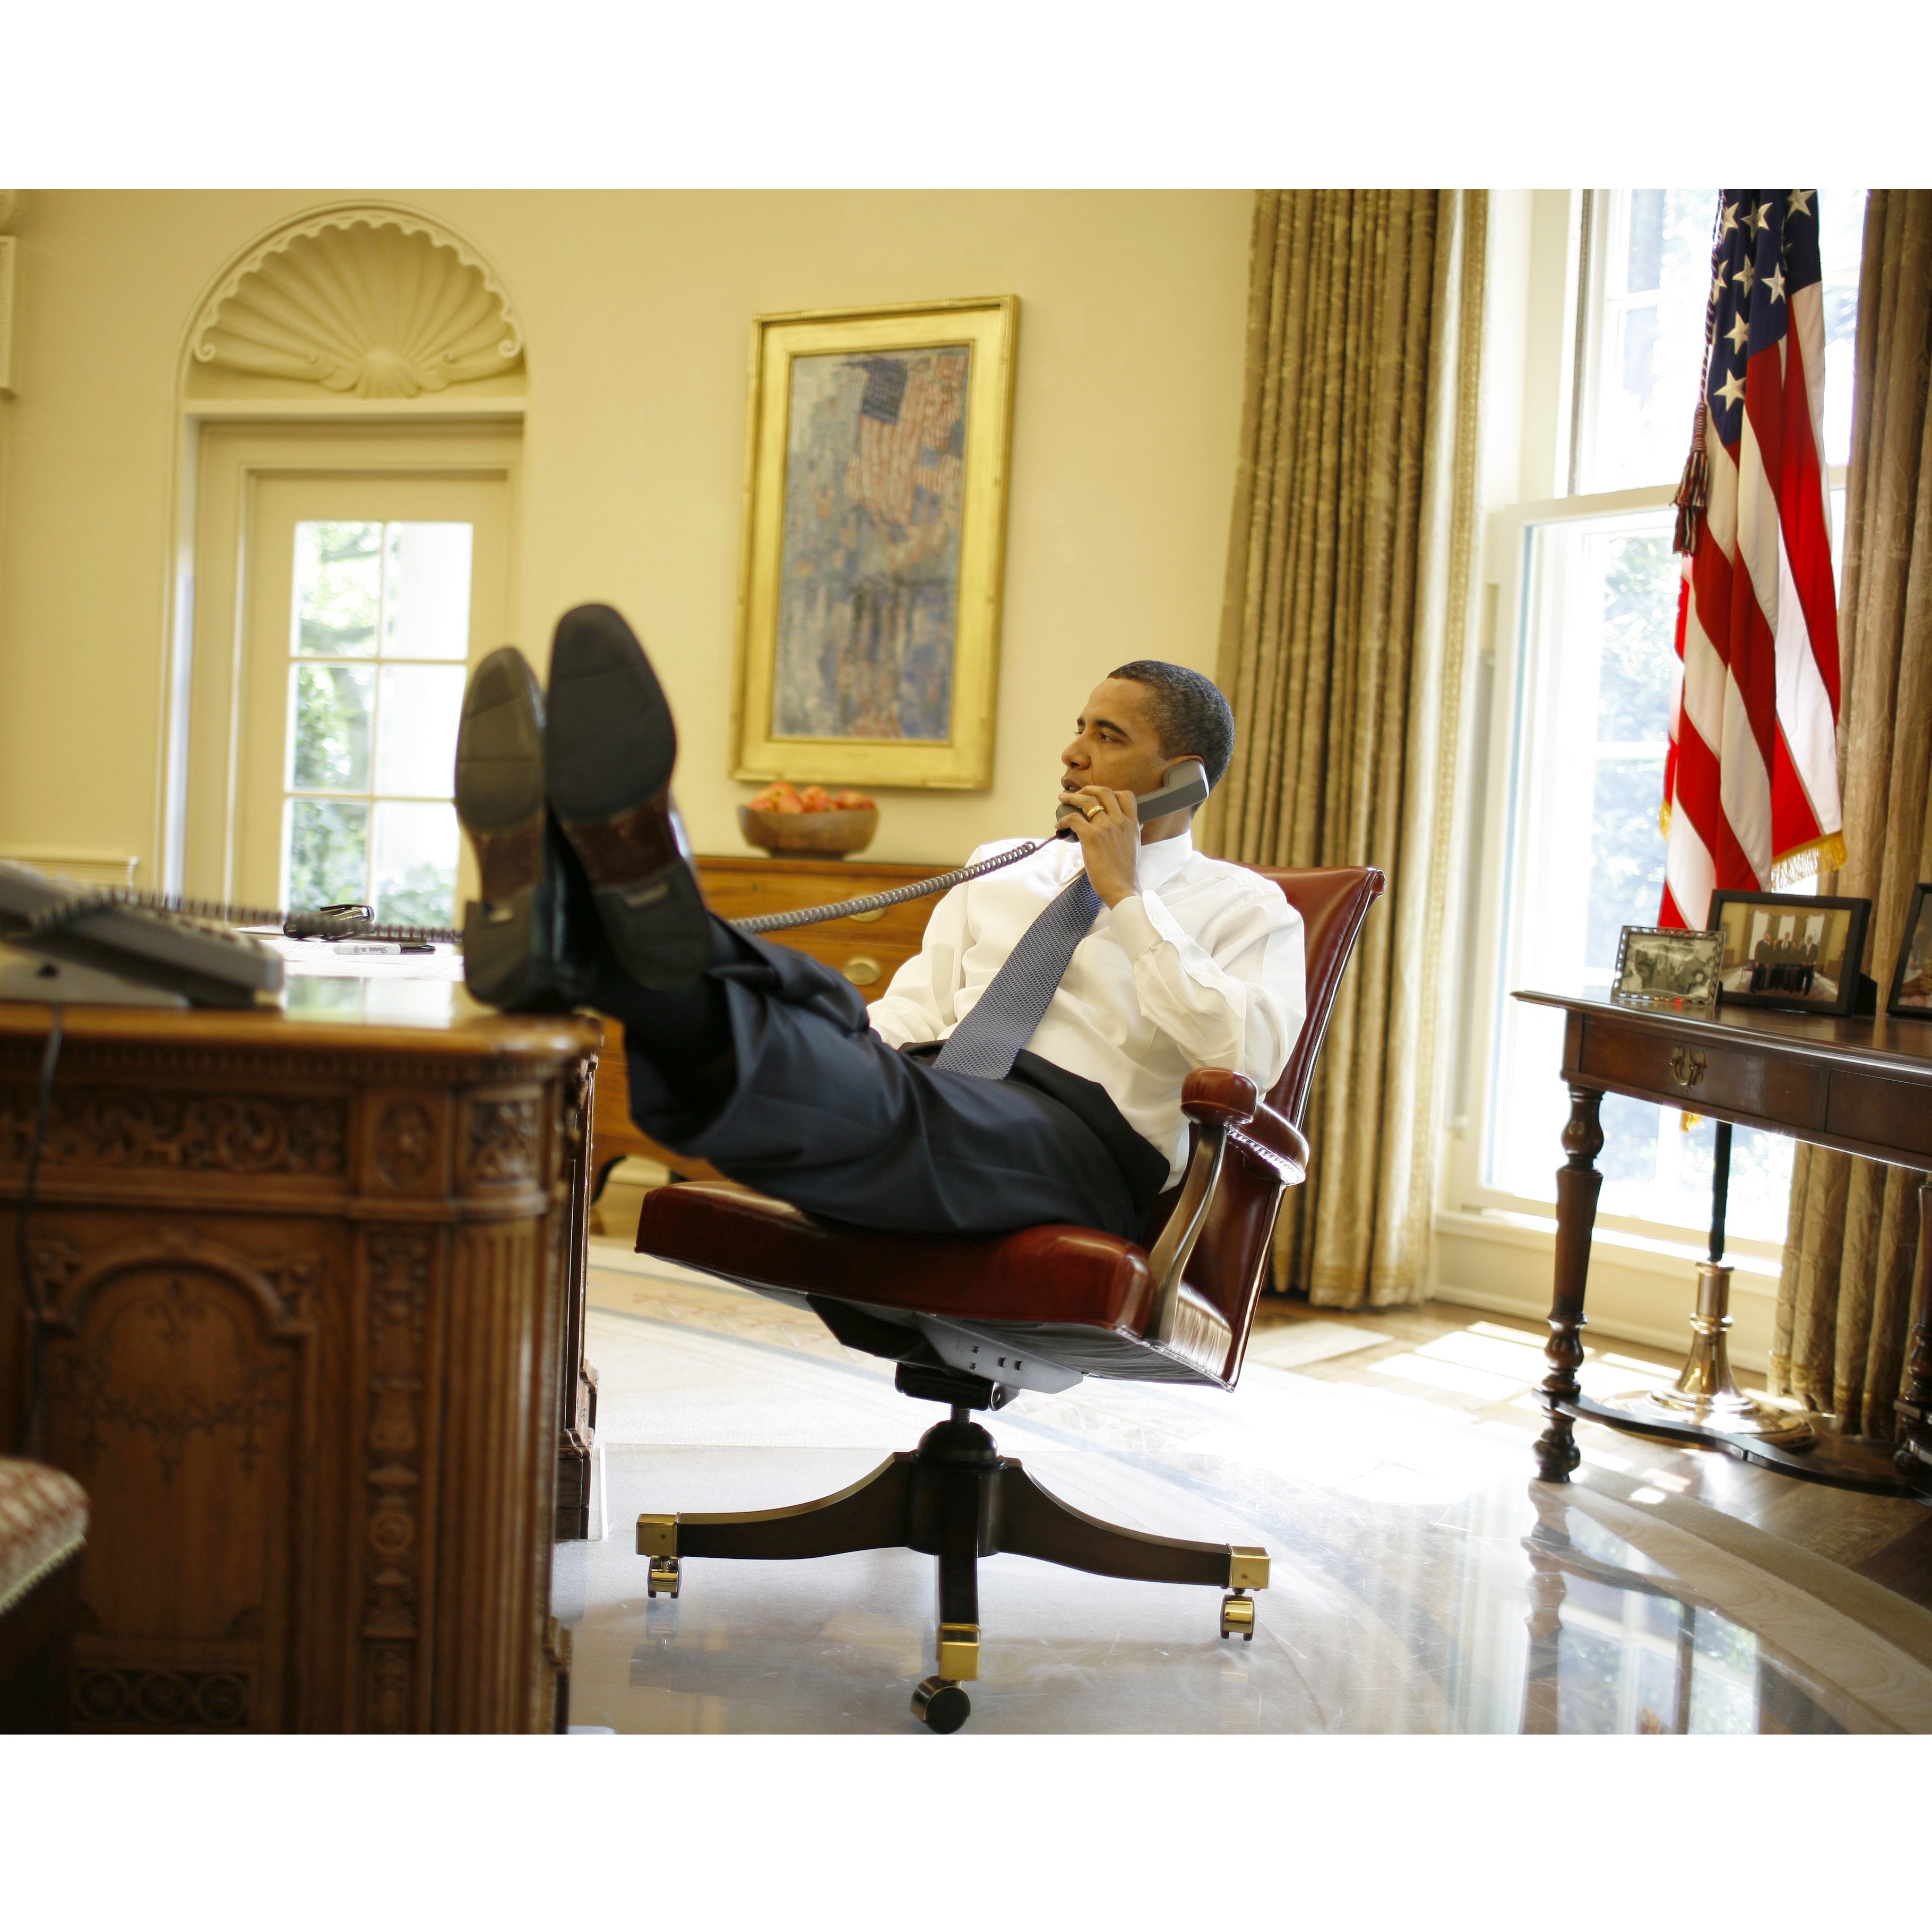 Definitive Proof That Barack Obama is the Swaggiest President Ever